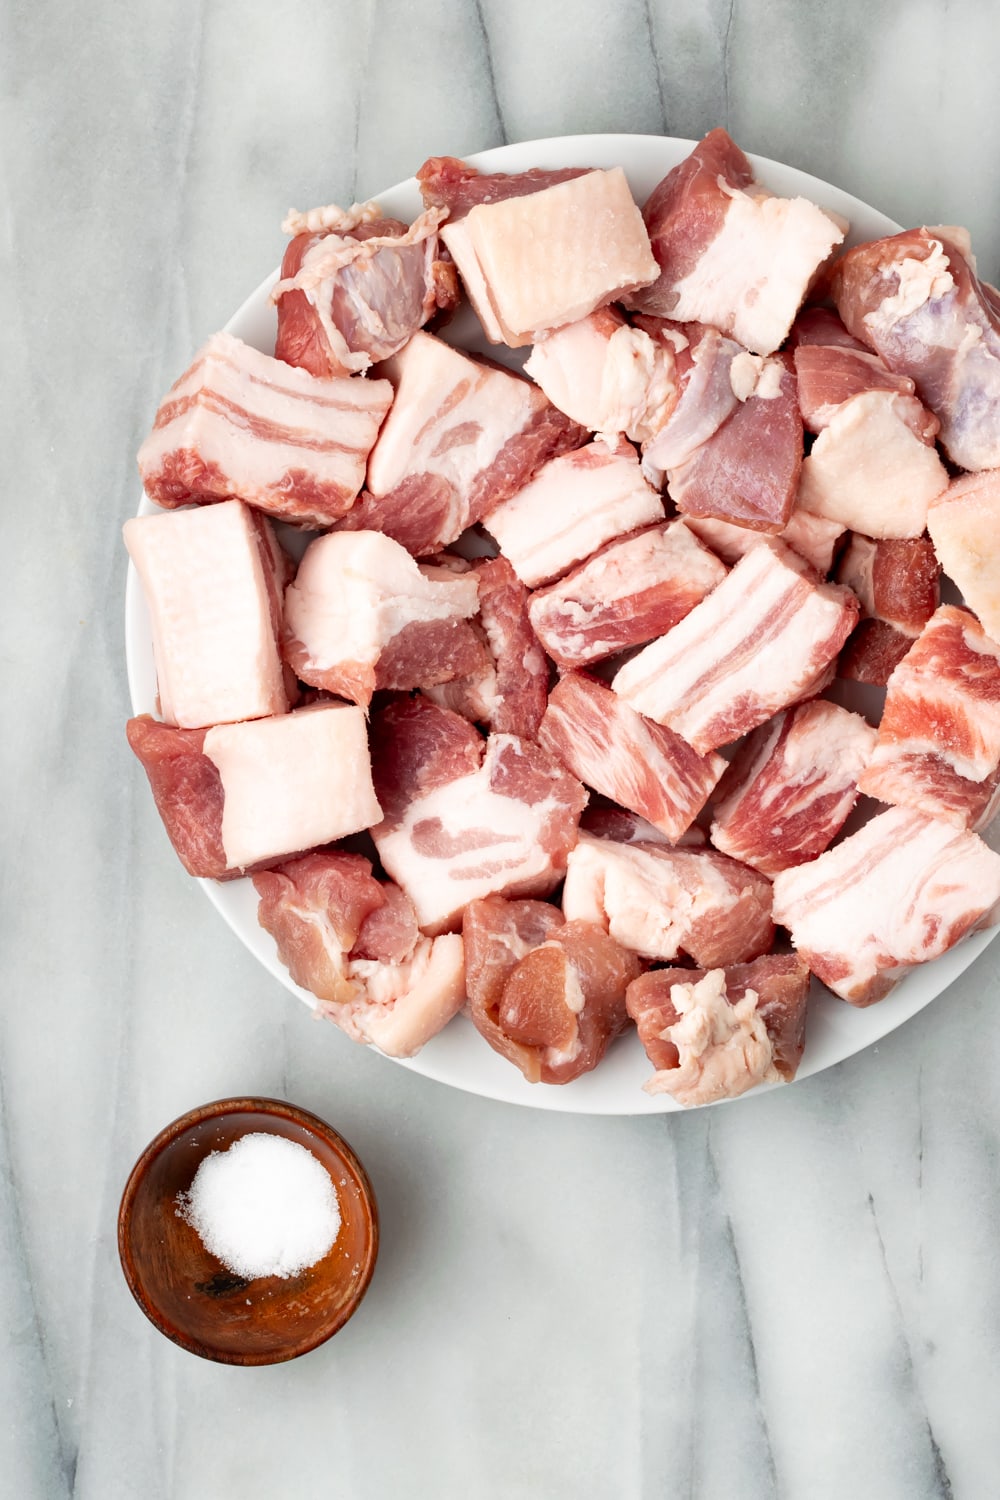 Cut pork belly pieces in 1 inch cubes on a round white plate with a small wooden bowl of salt on the side.